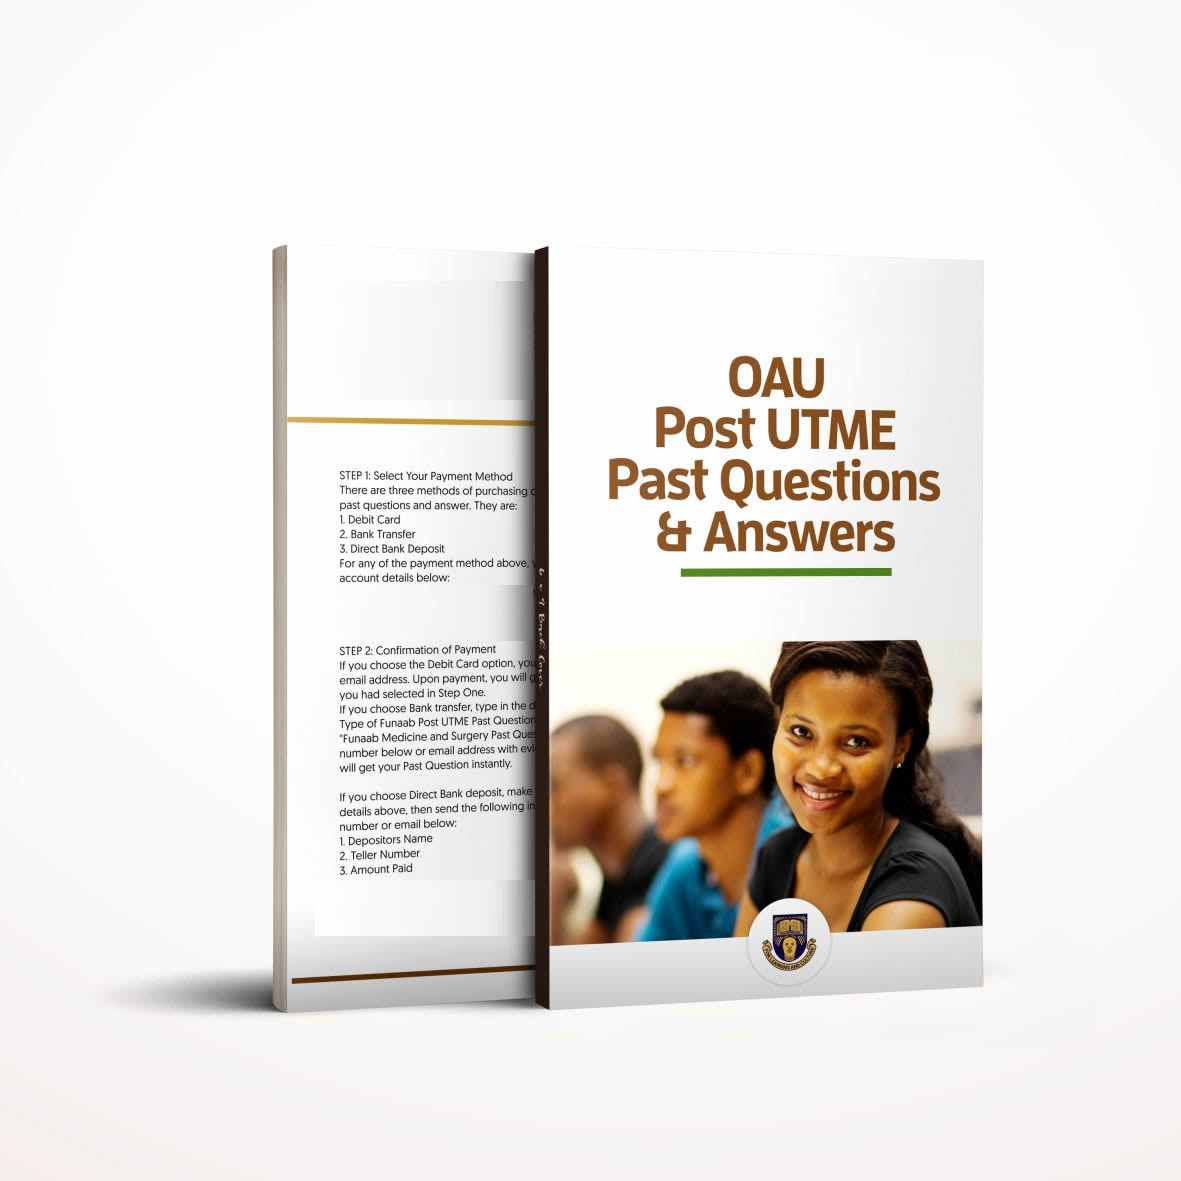 oau post utme past questions and answers - Pdf